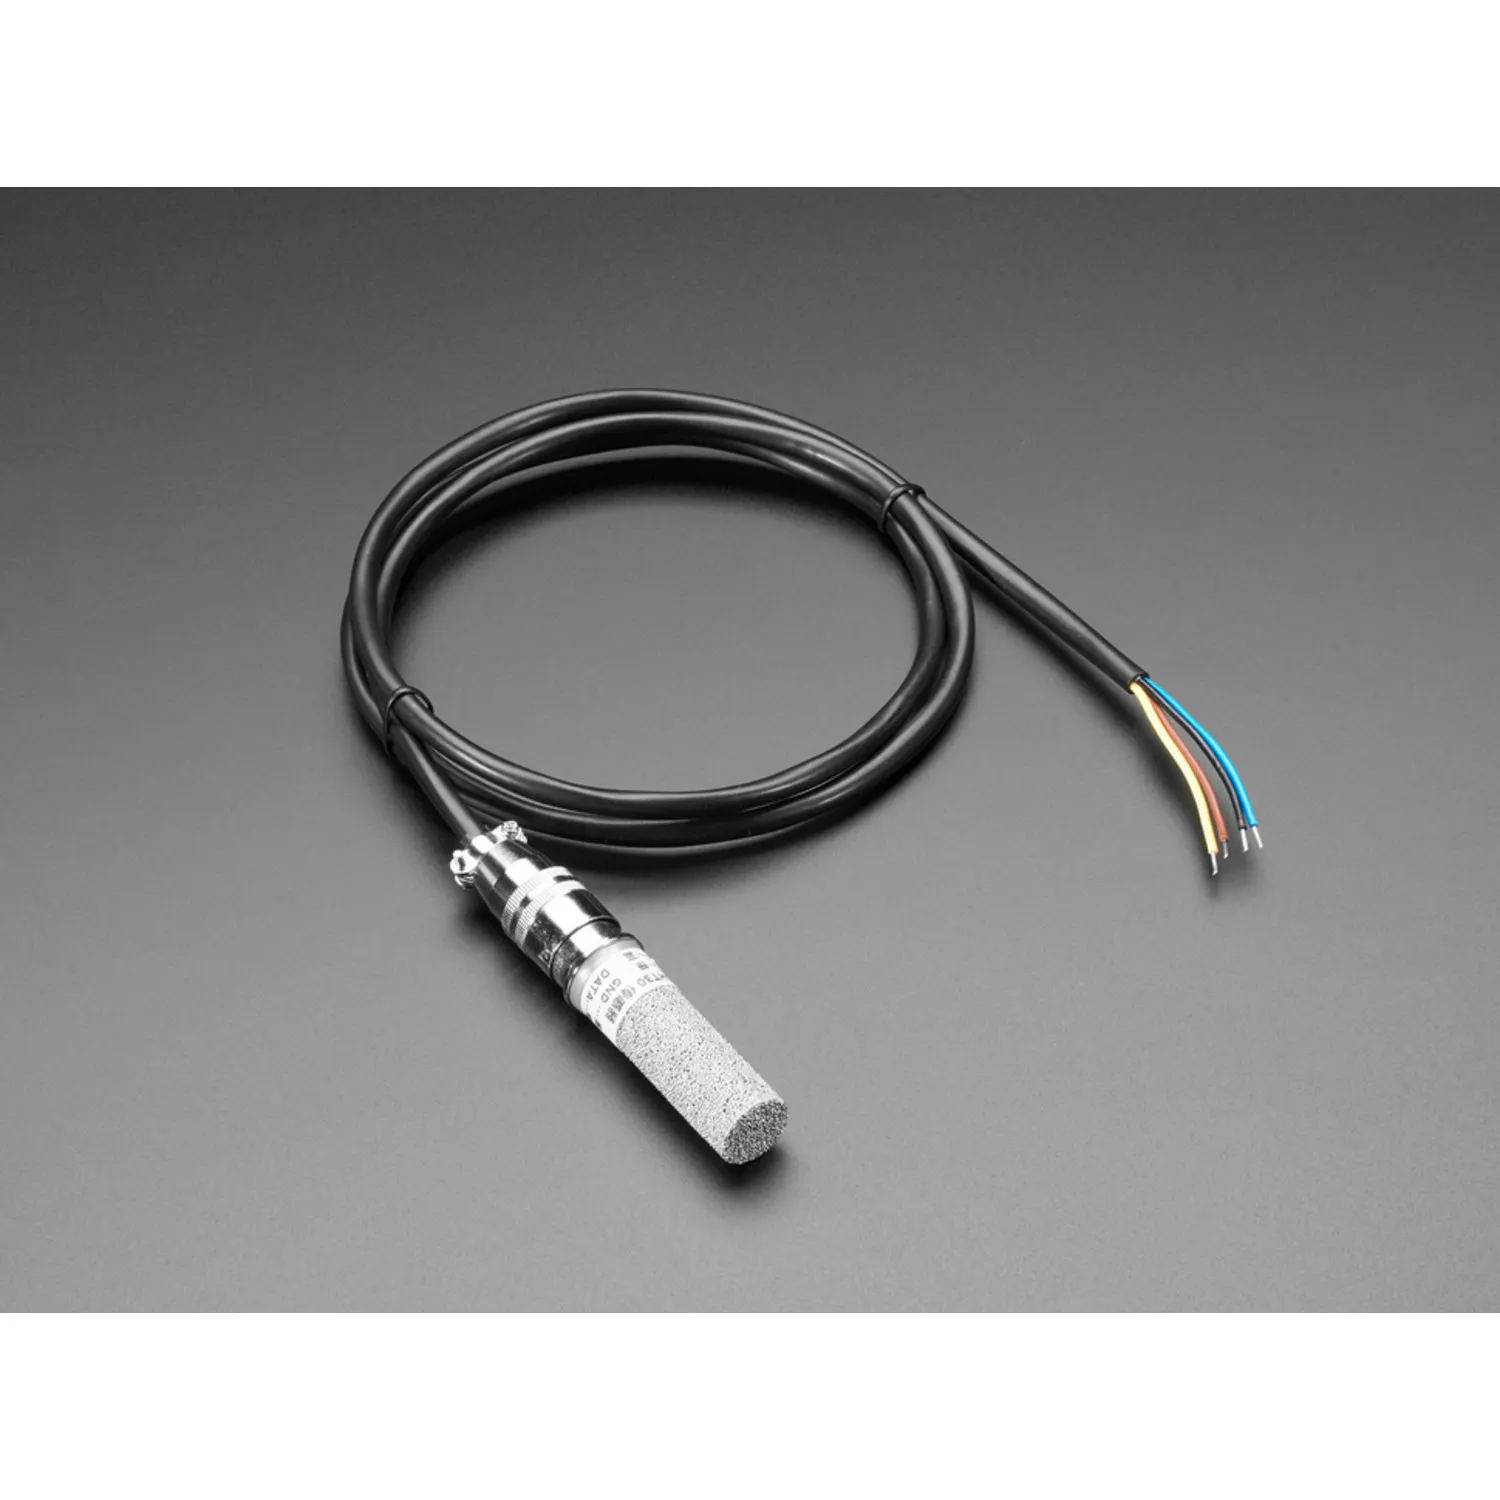 Photo of SHT-30 Mesh-protected Weather-proof Temperature/Humidity Sensor - 1M Cable